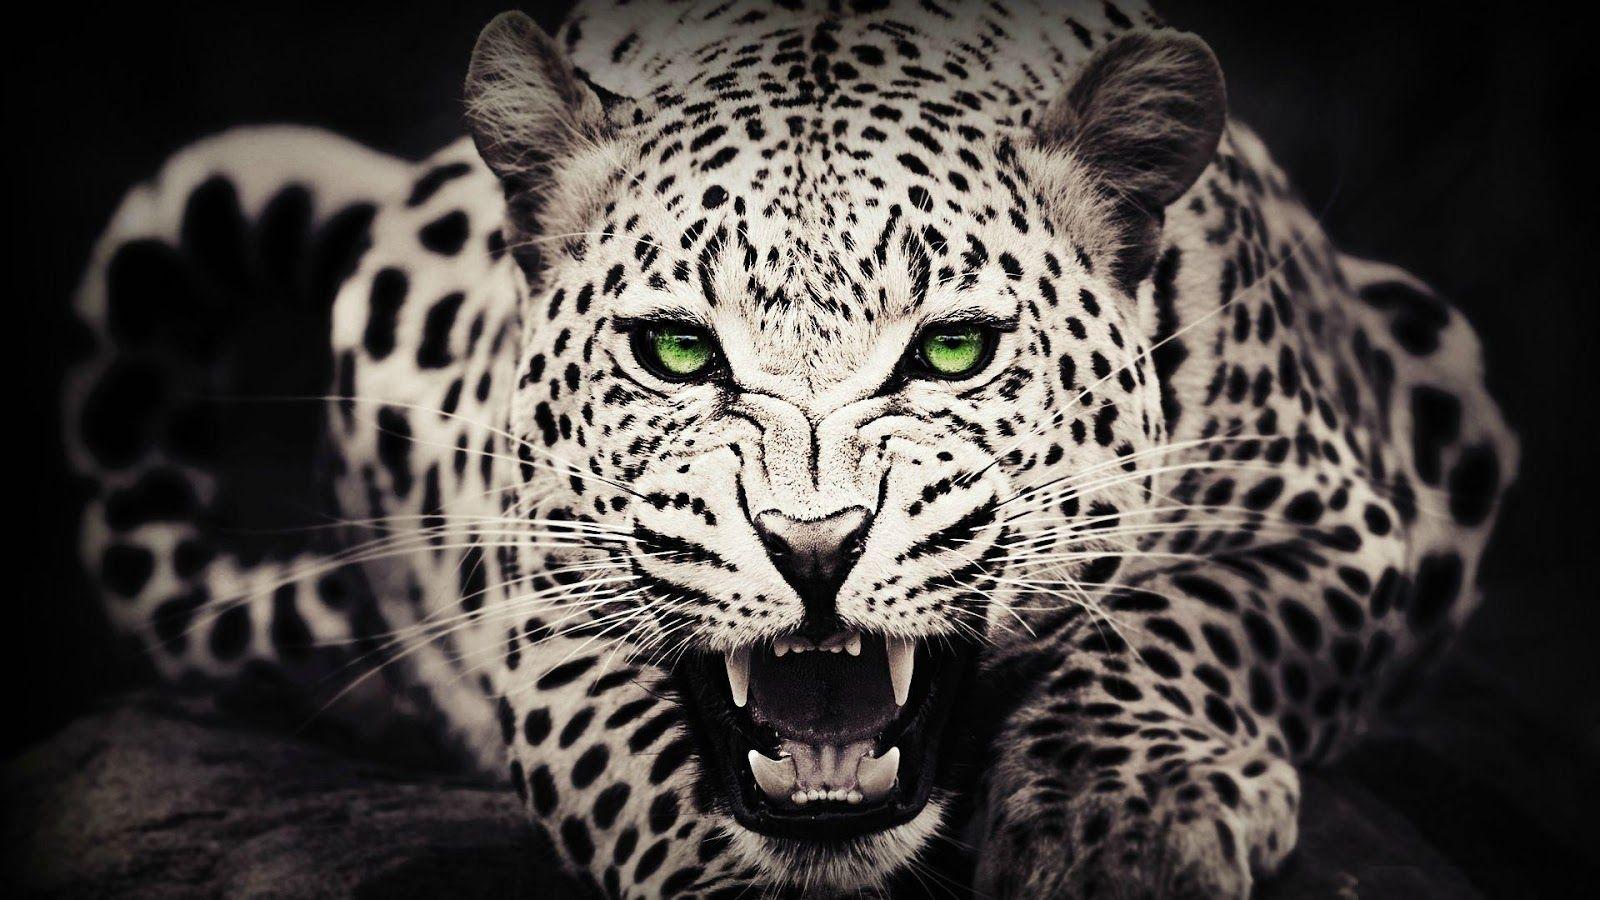 Big Cat Wallpaper High Quality Desktop, iphone and android